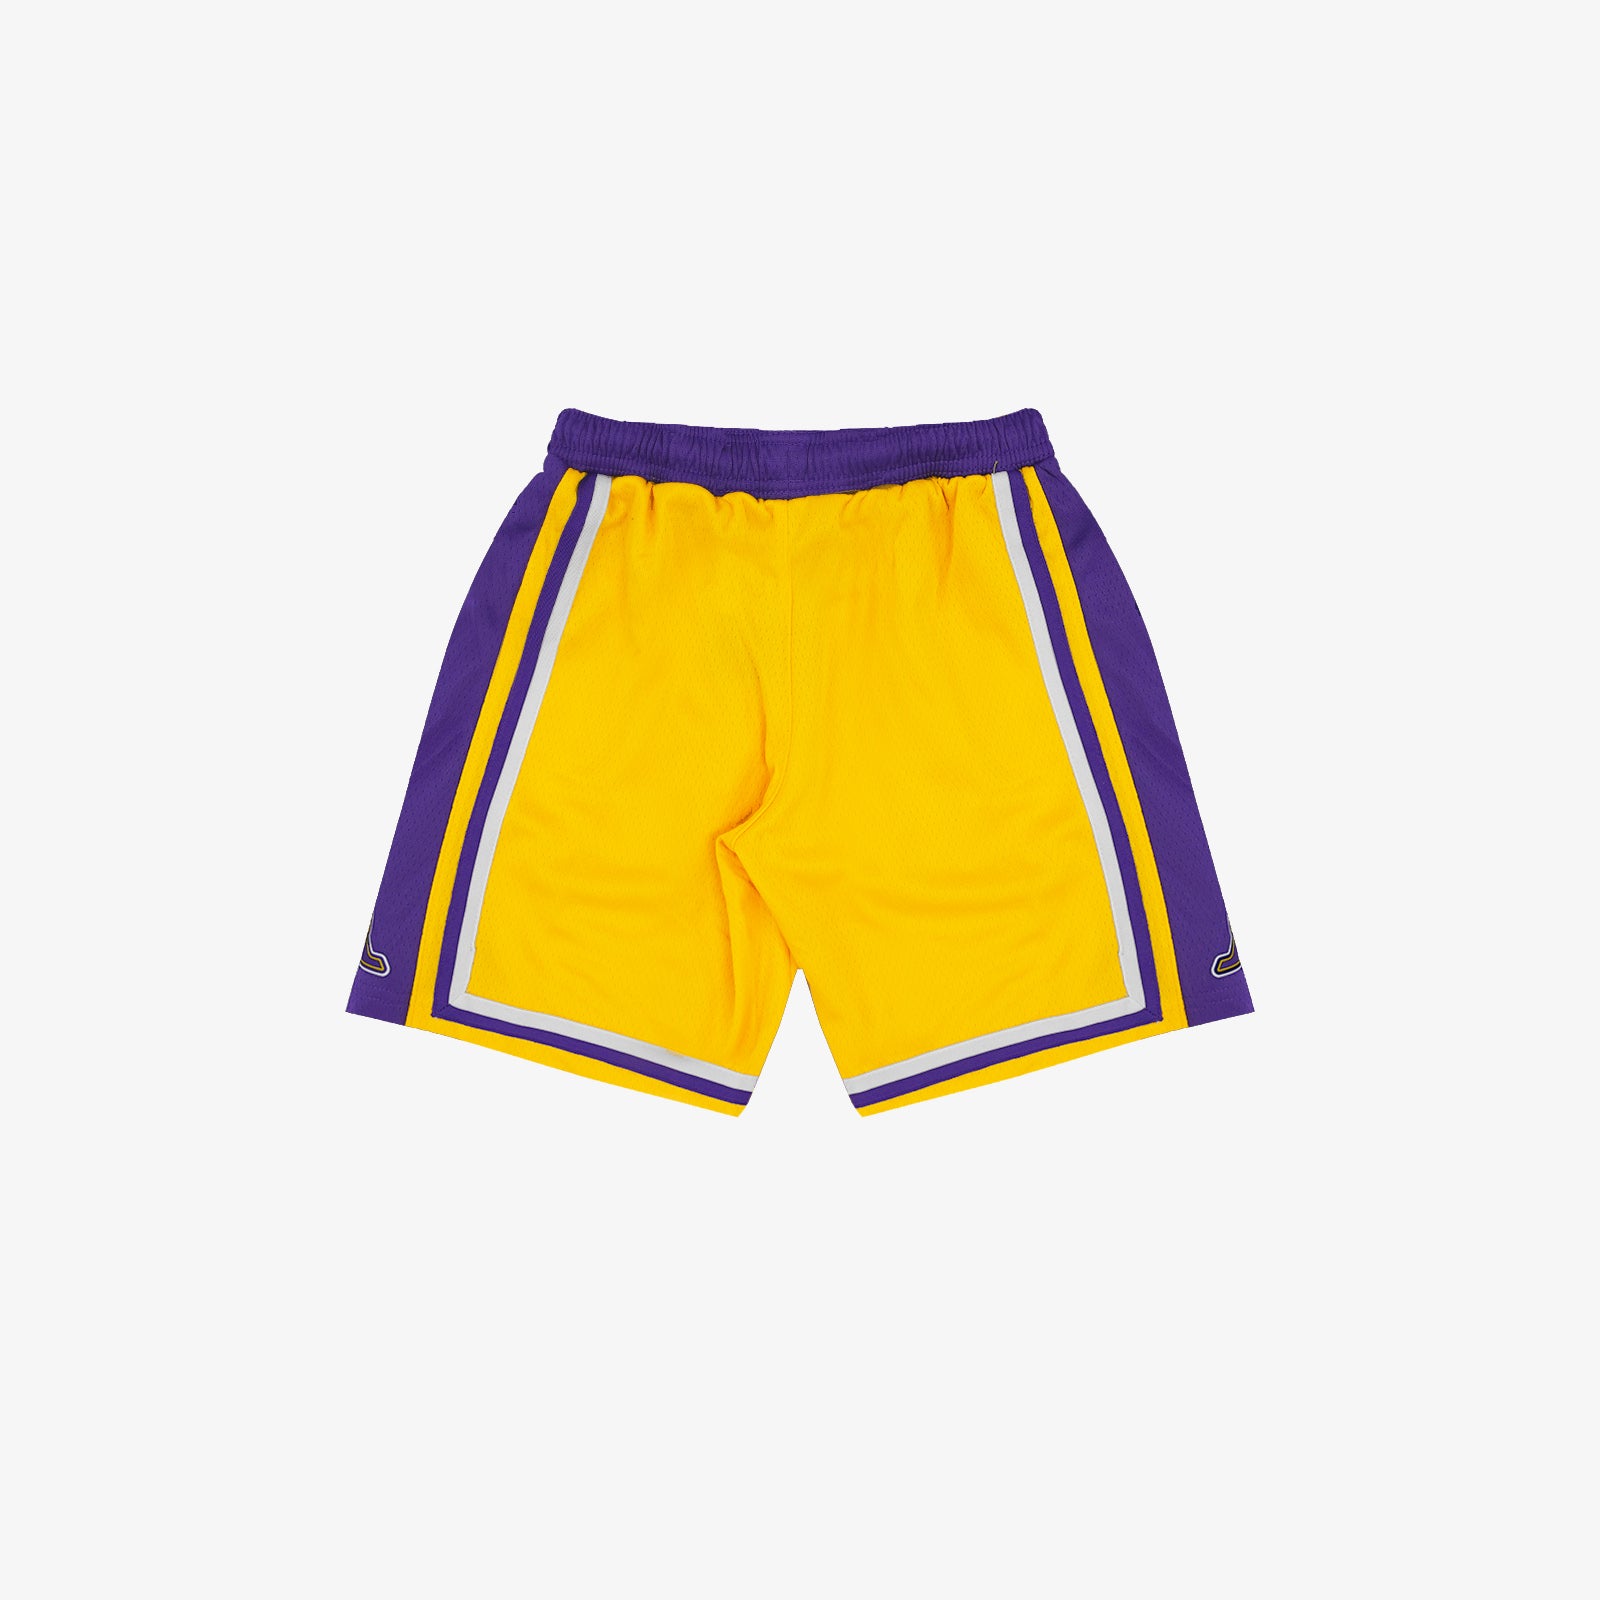 Official Los Angeles Lakers Kids Shorts, Basketball Shorts, Gym